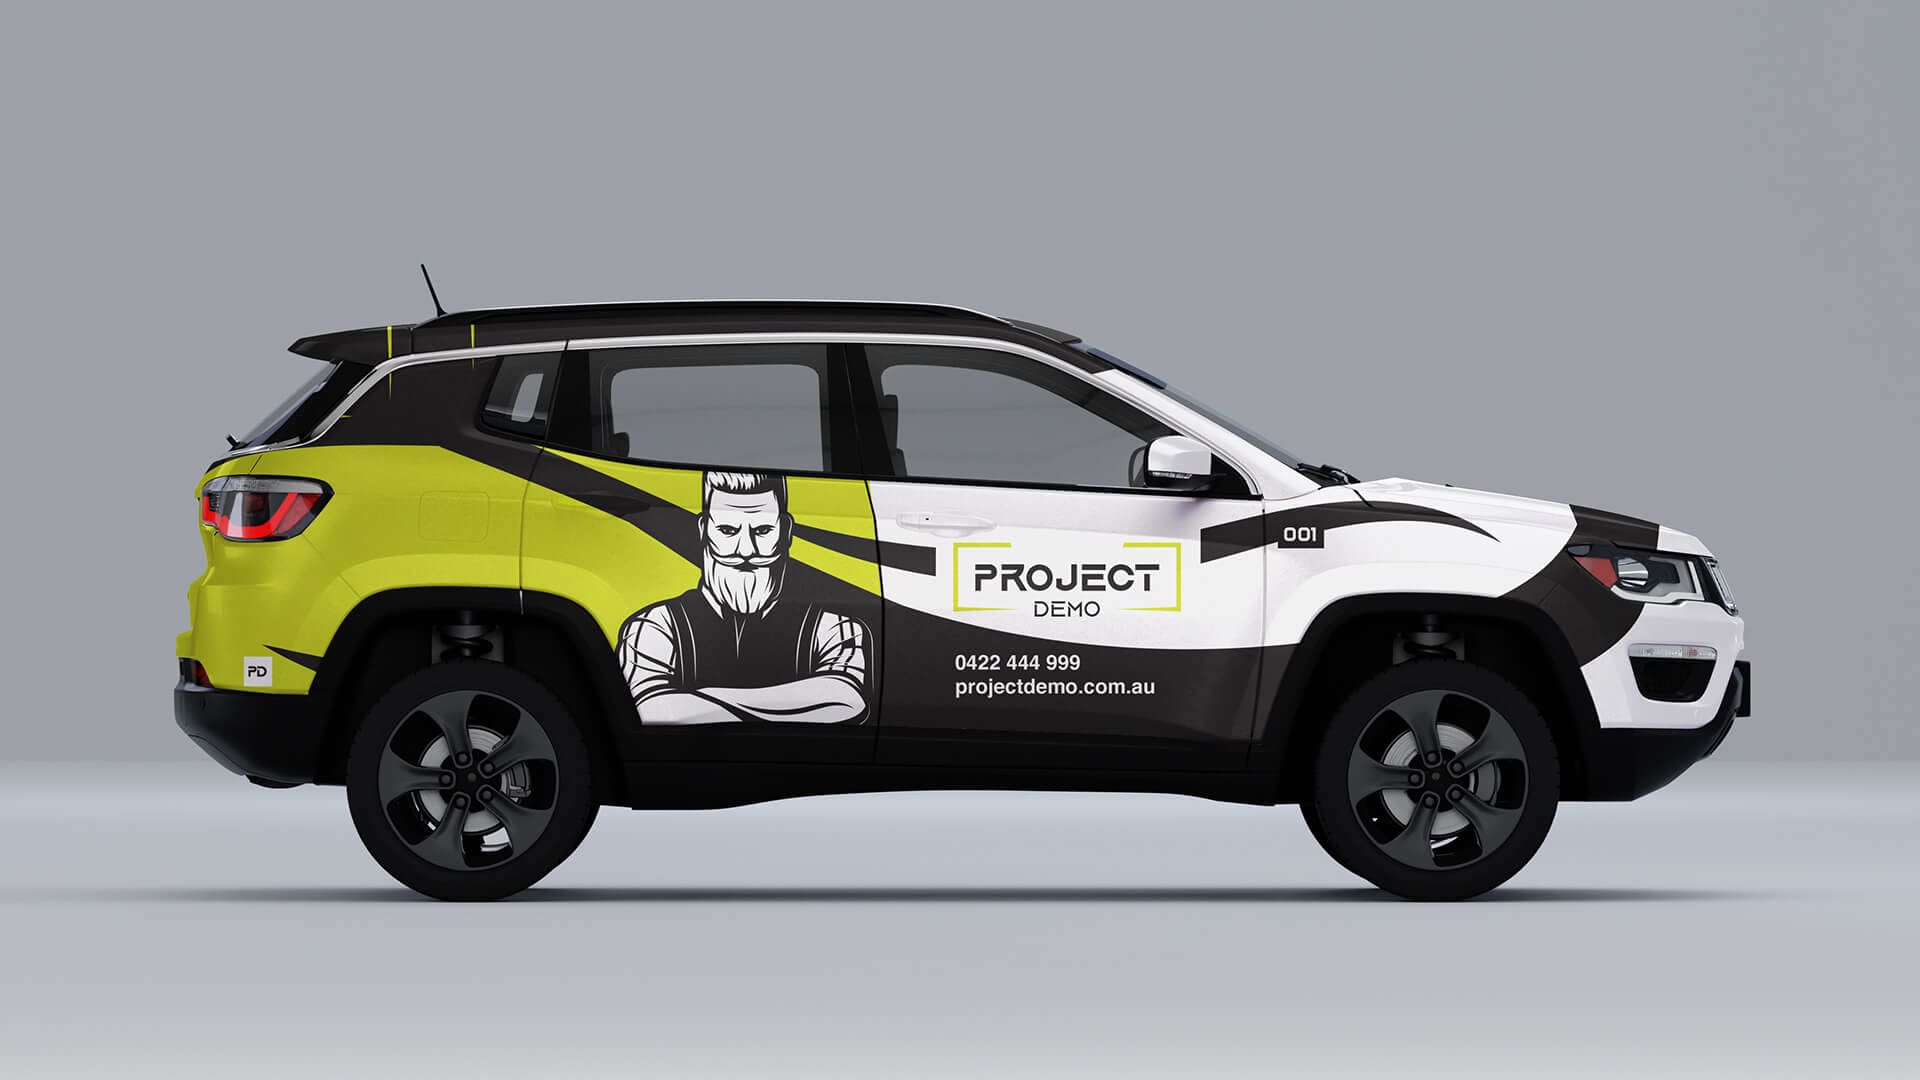 Project Demo branded ute mockup (side view)